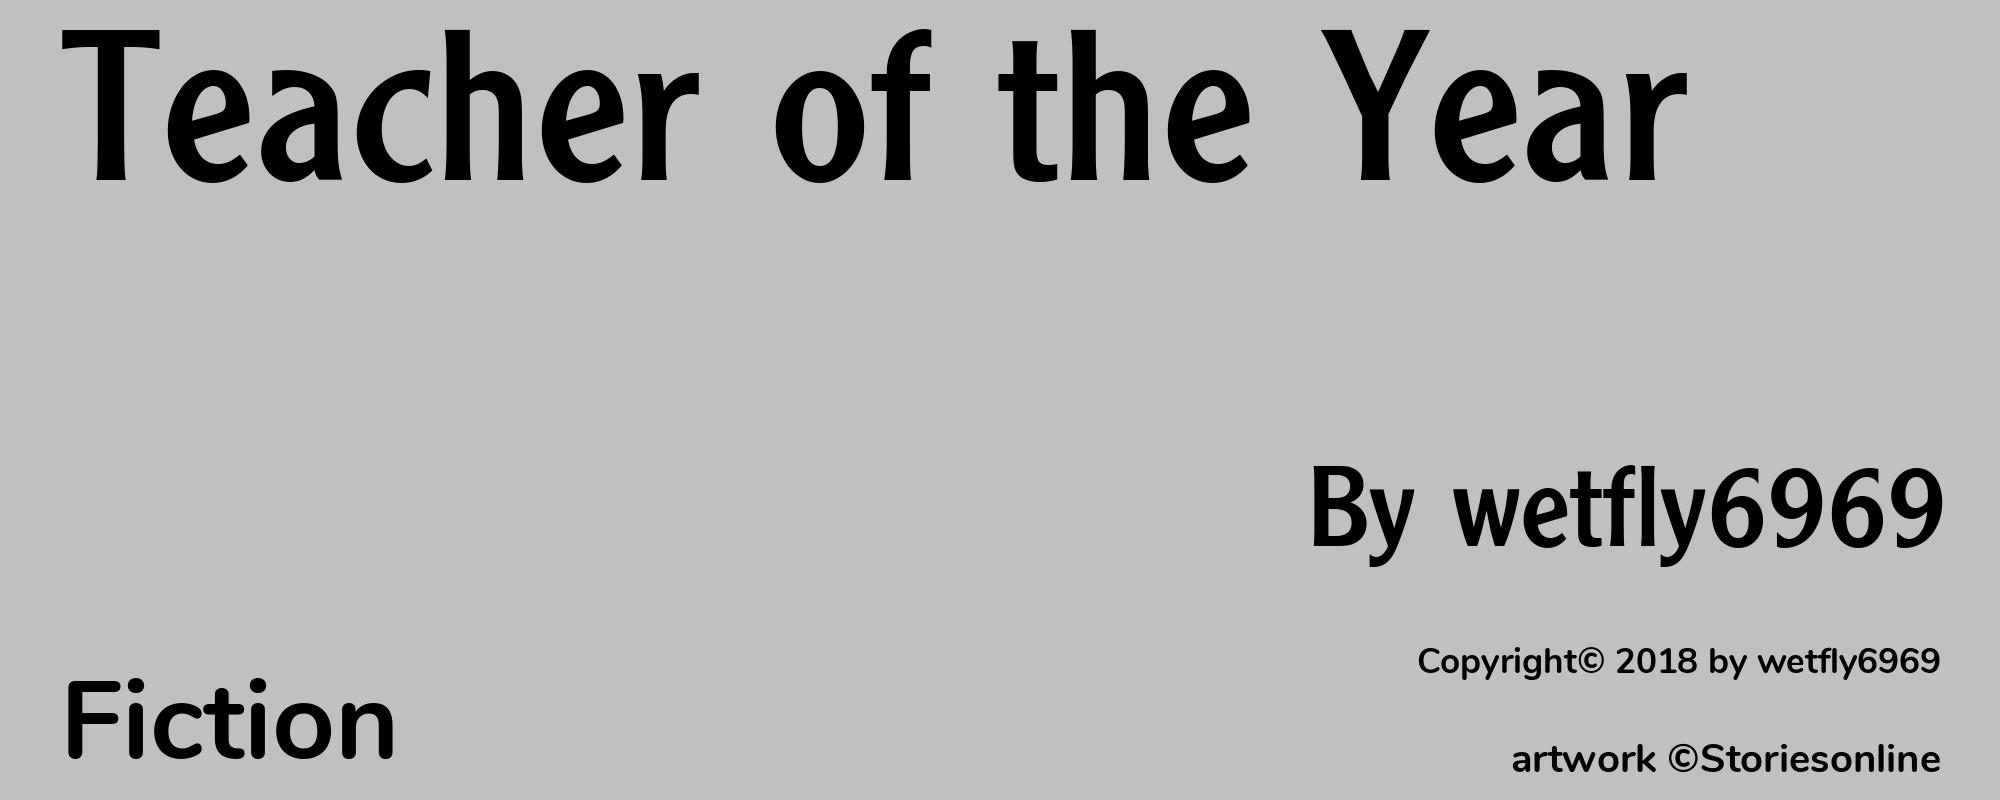 Teacher of the Year - Cover